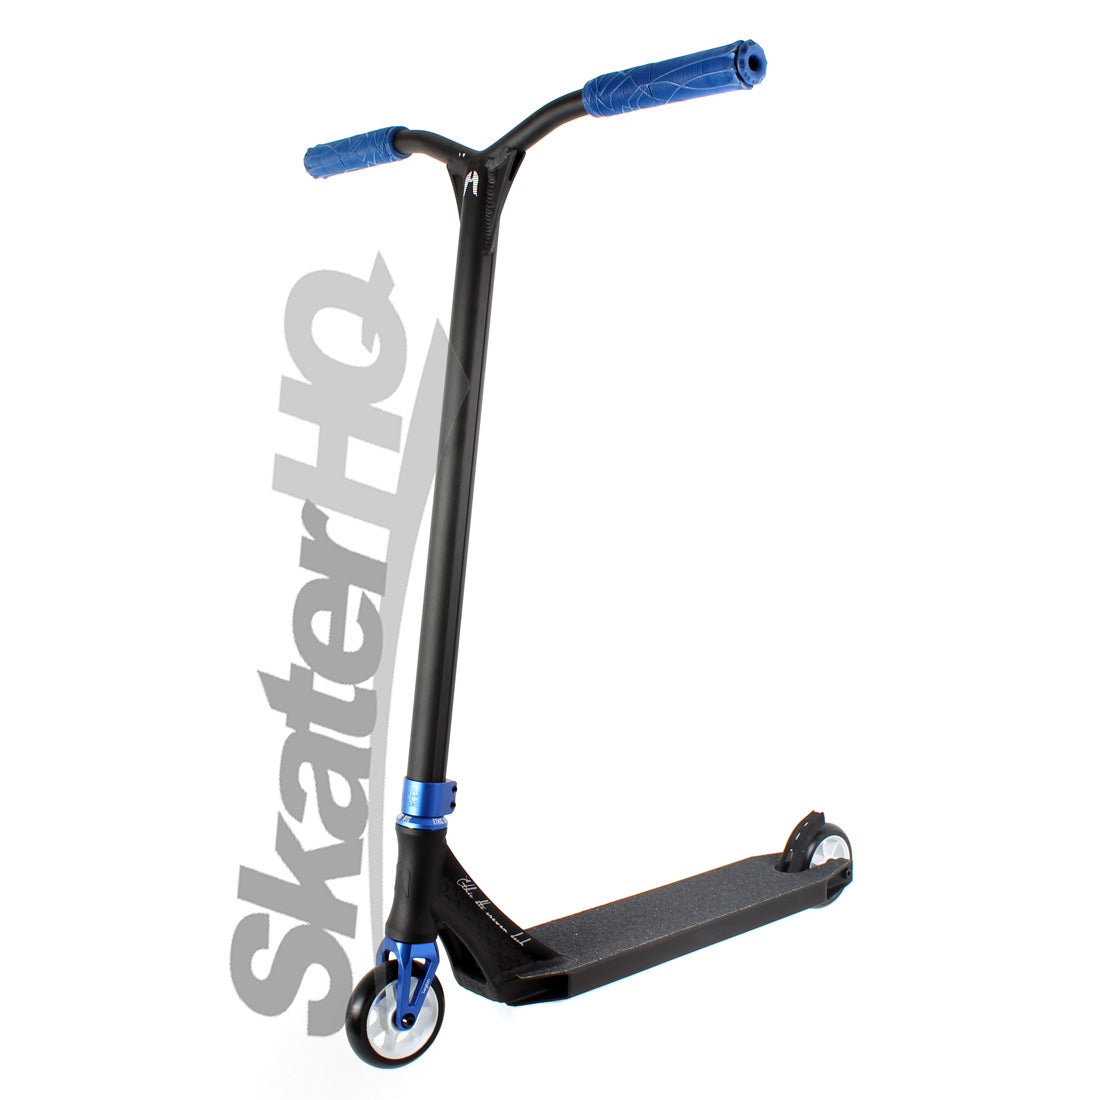 Ethic Erawan Complete - Blue/Black Scooter Completes Trick